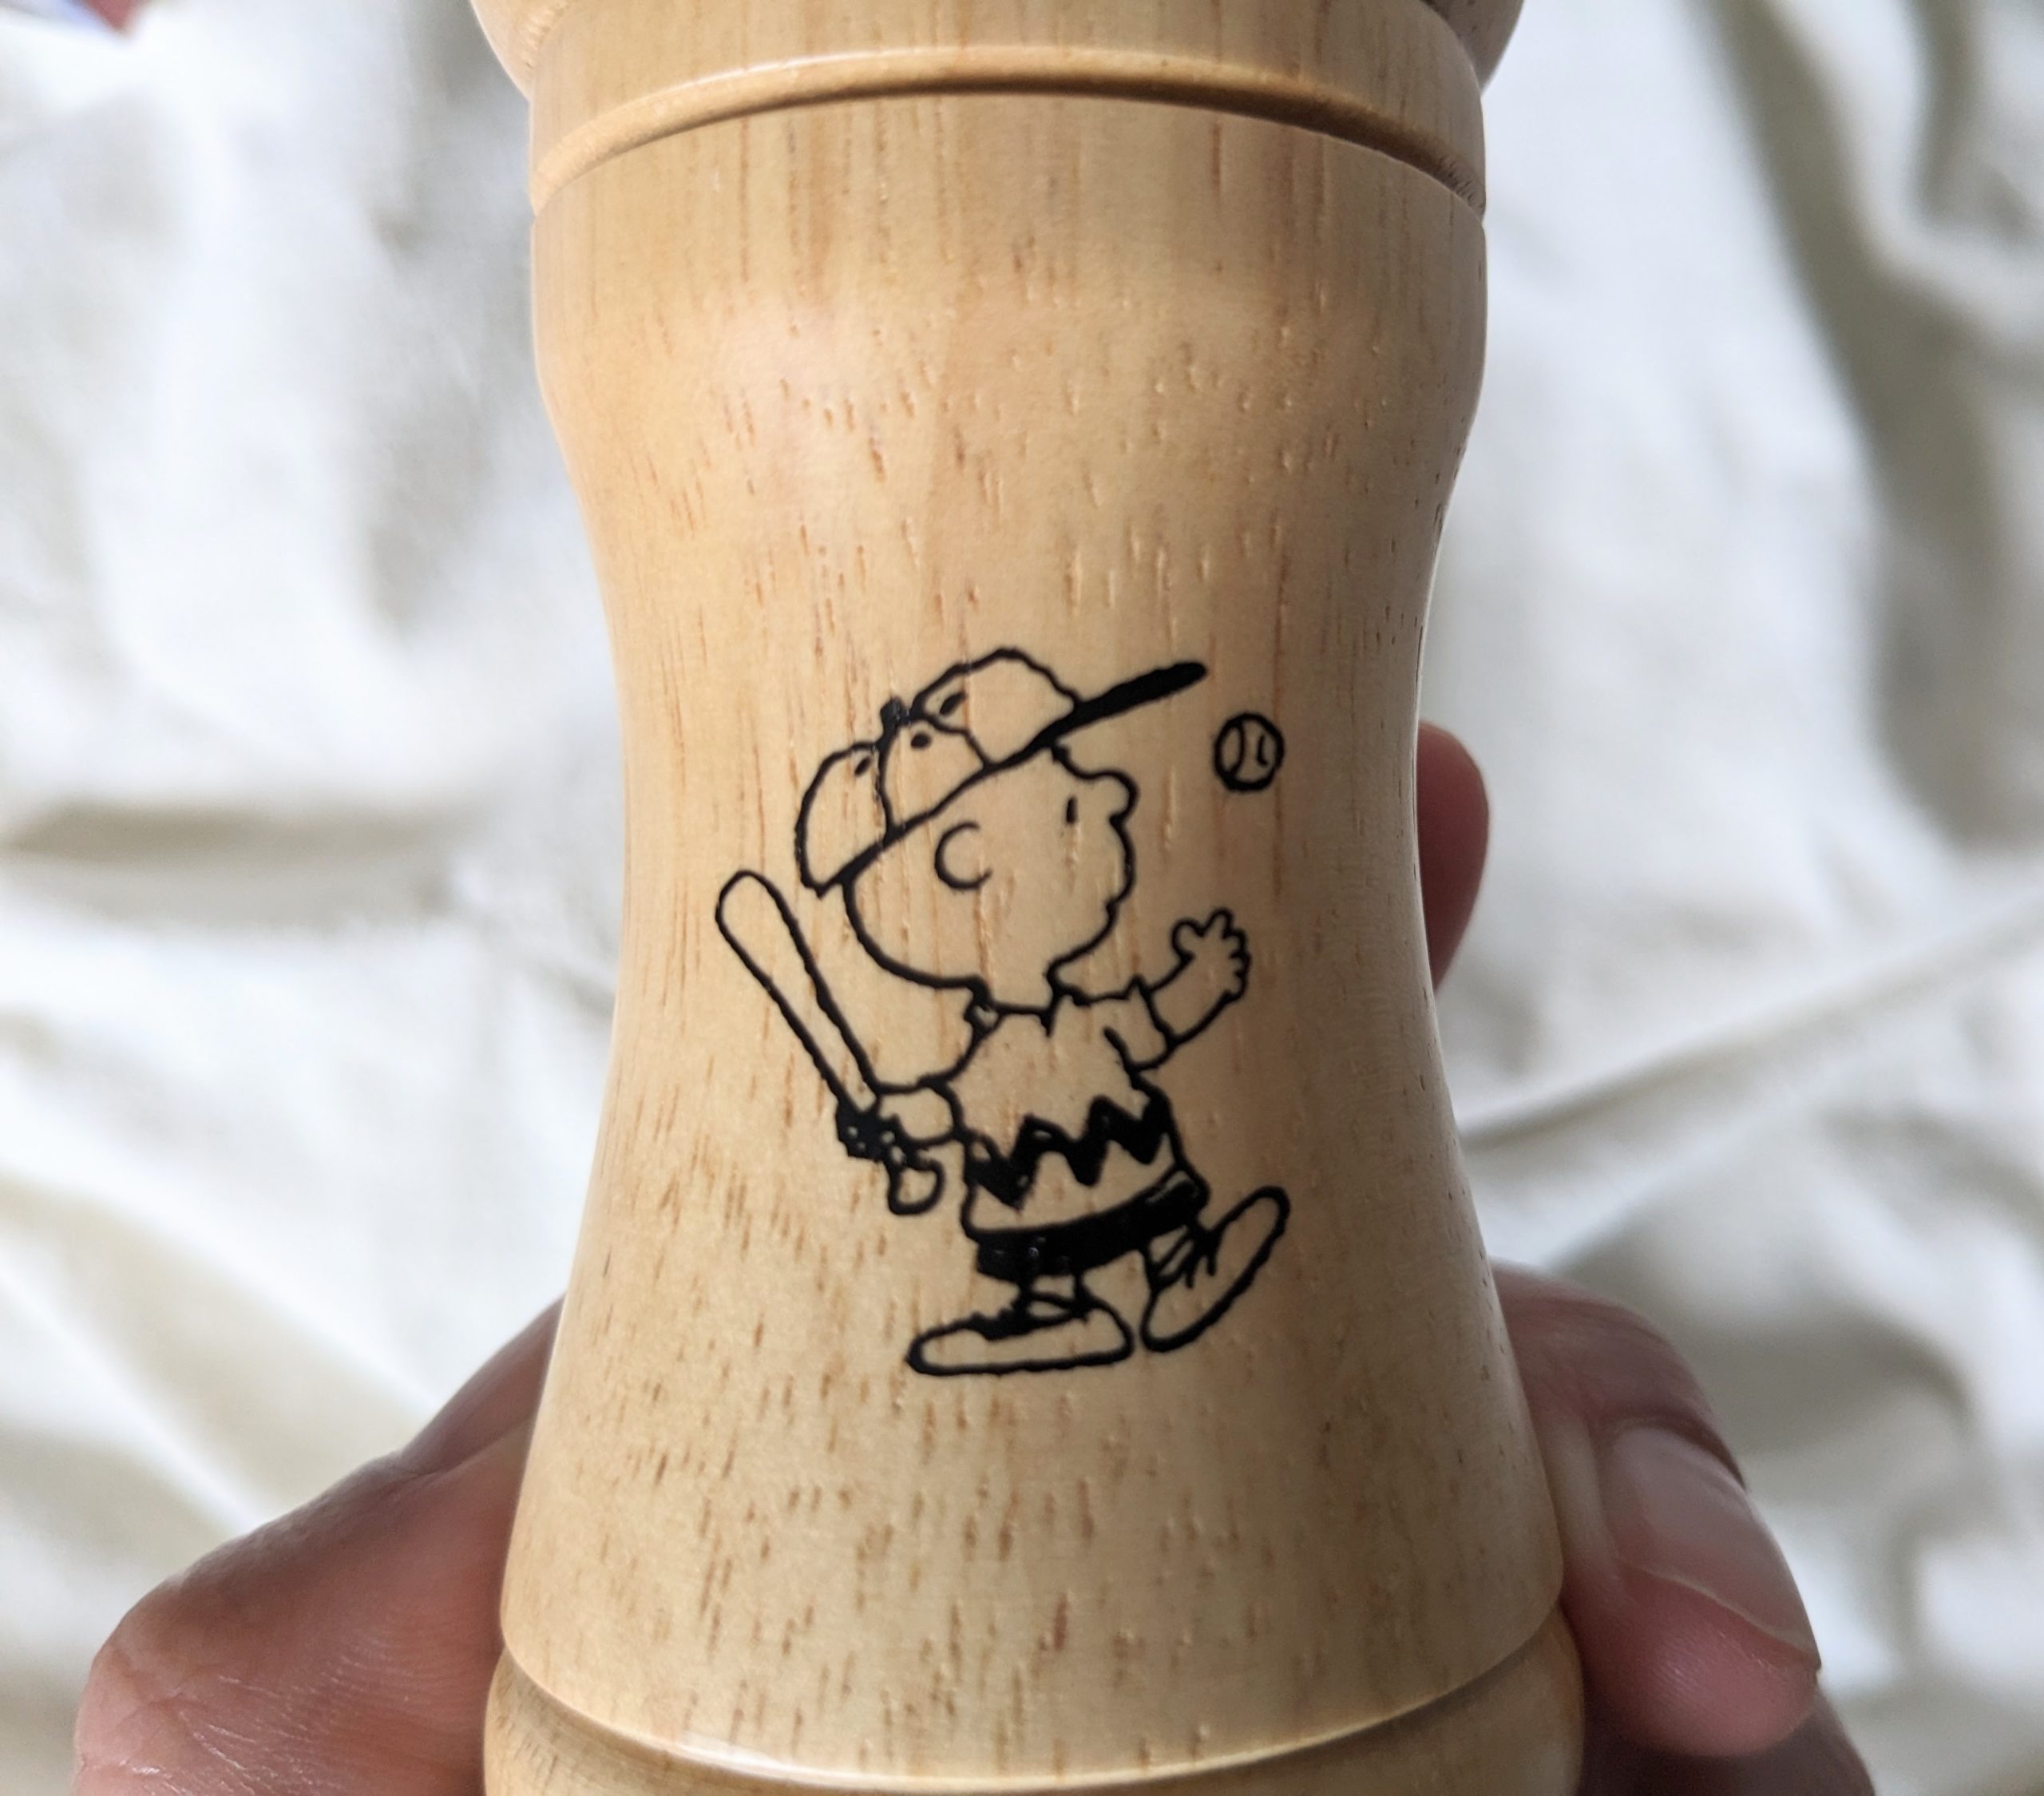 SNOOPY Pepper mill BOOK